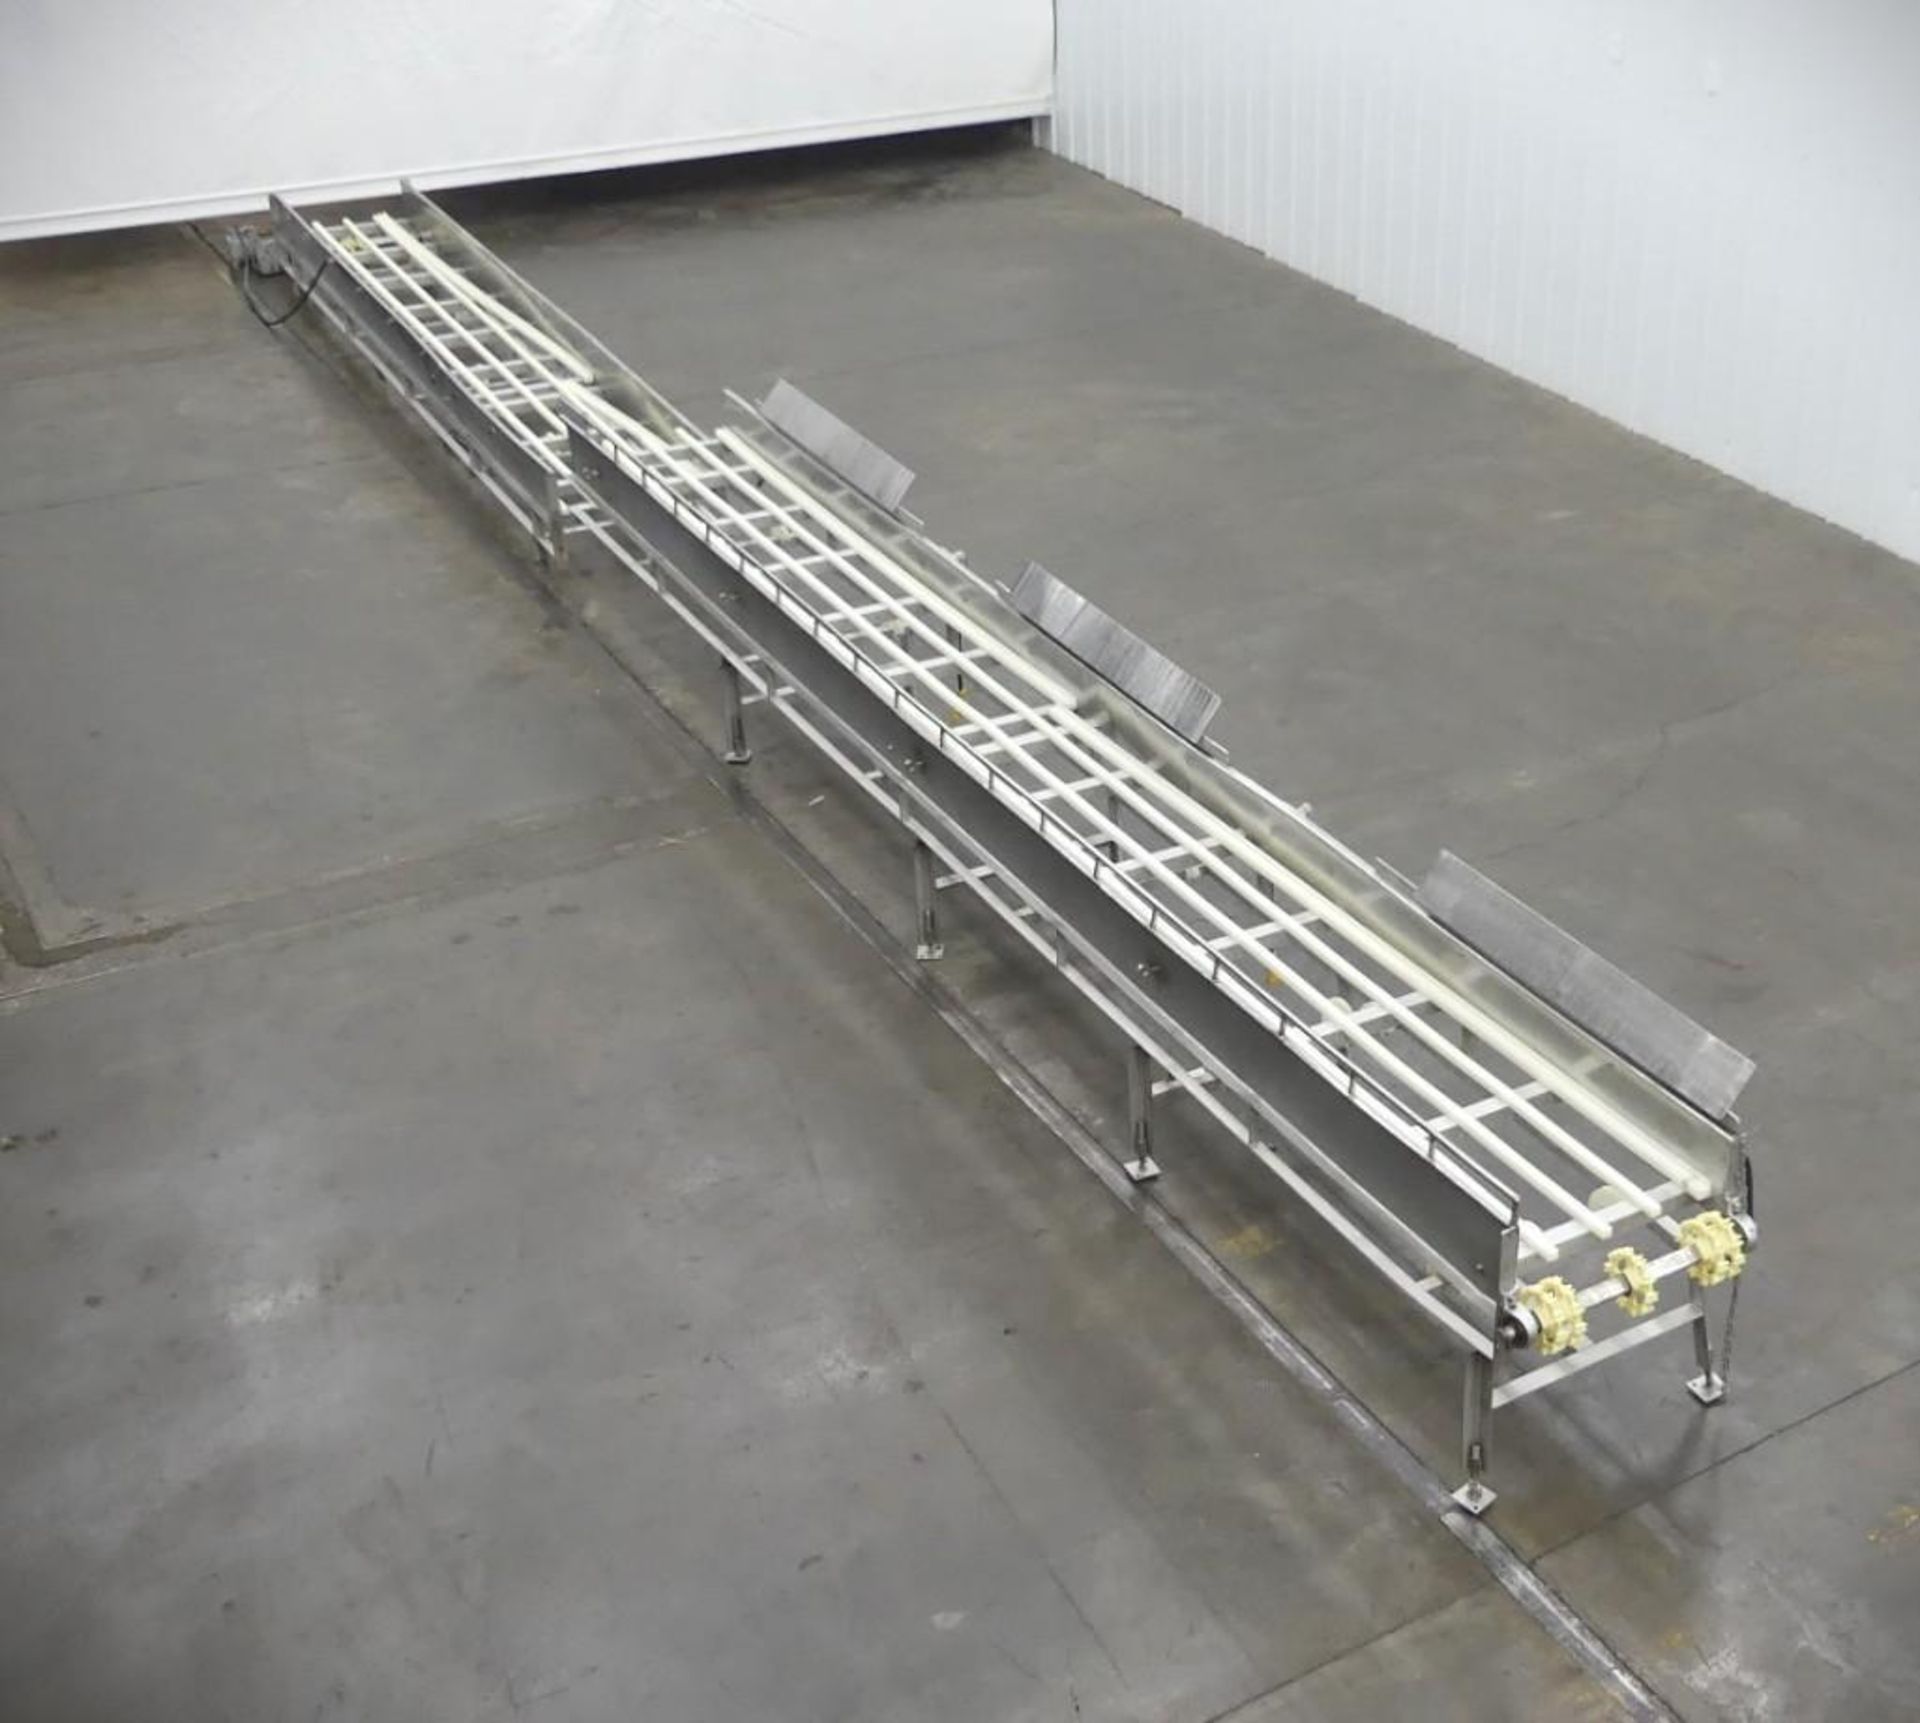 Two Sections of Stainless Steel Conveyor Frame